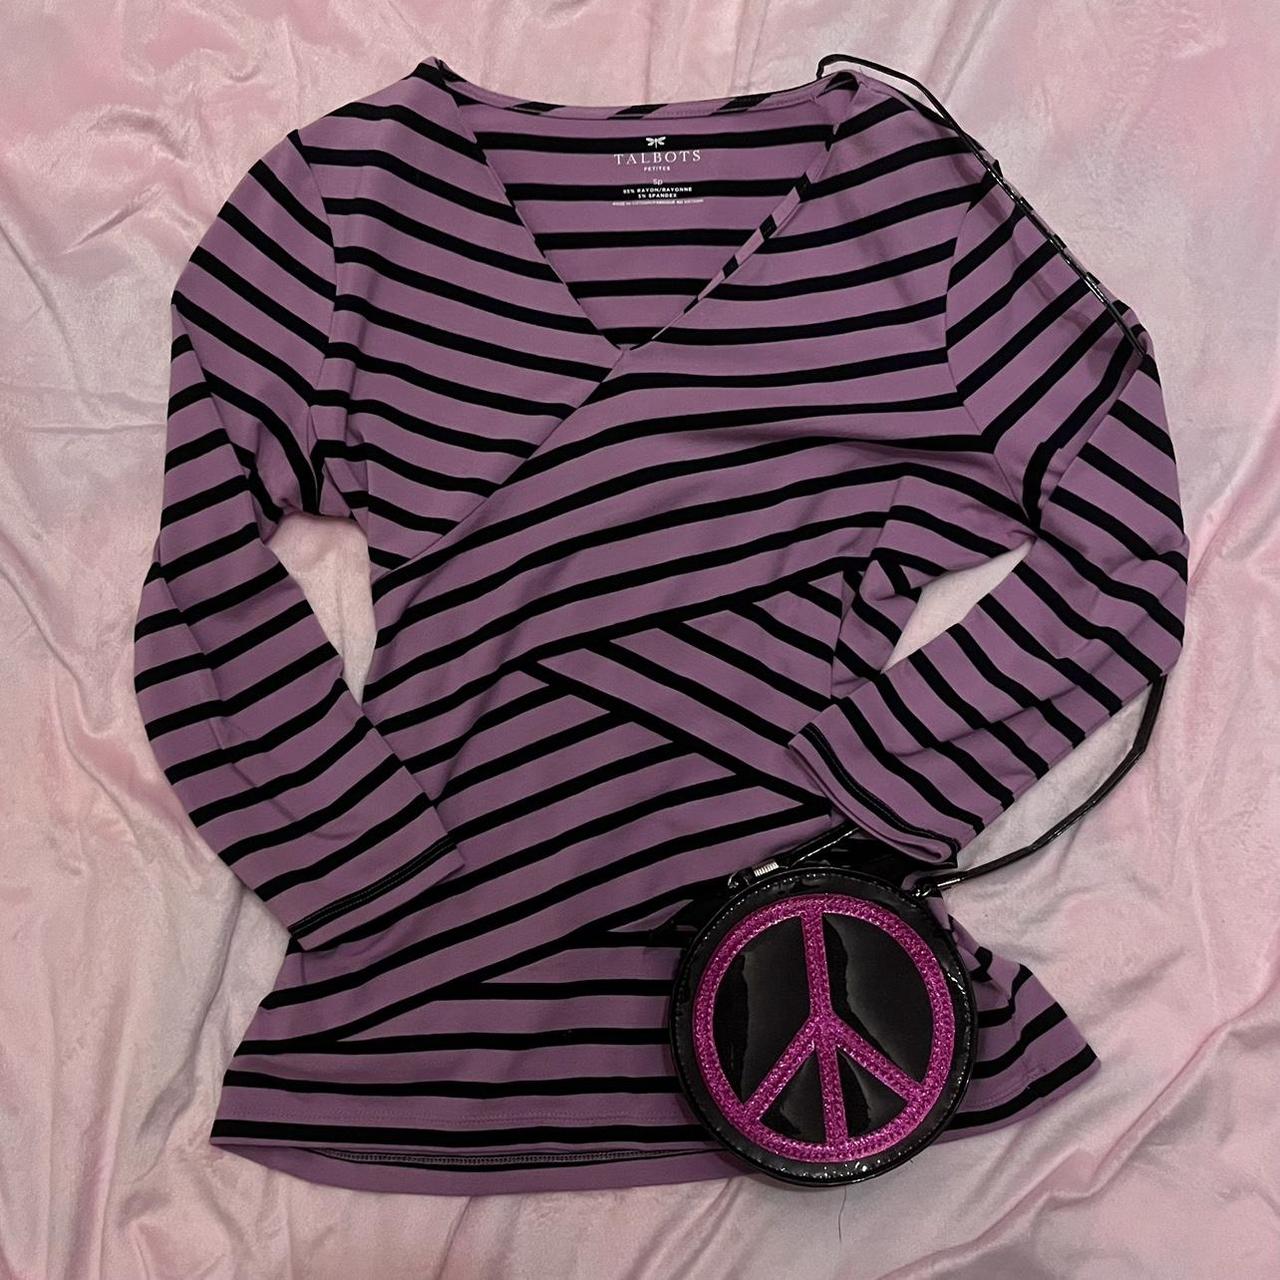 sparkly pink peace sign